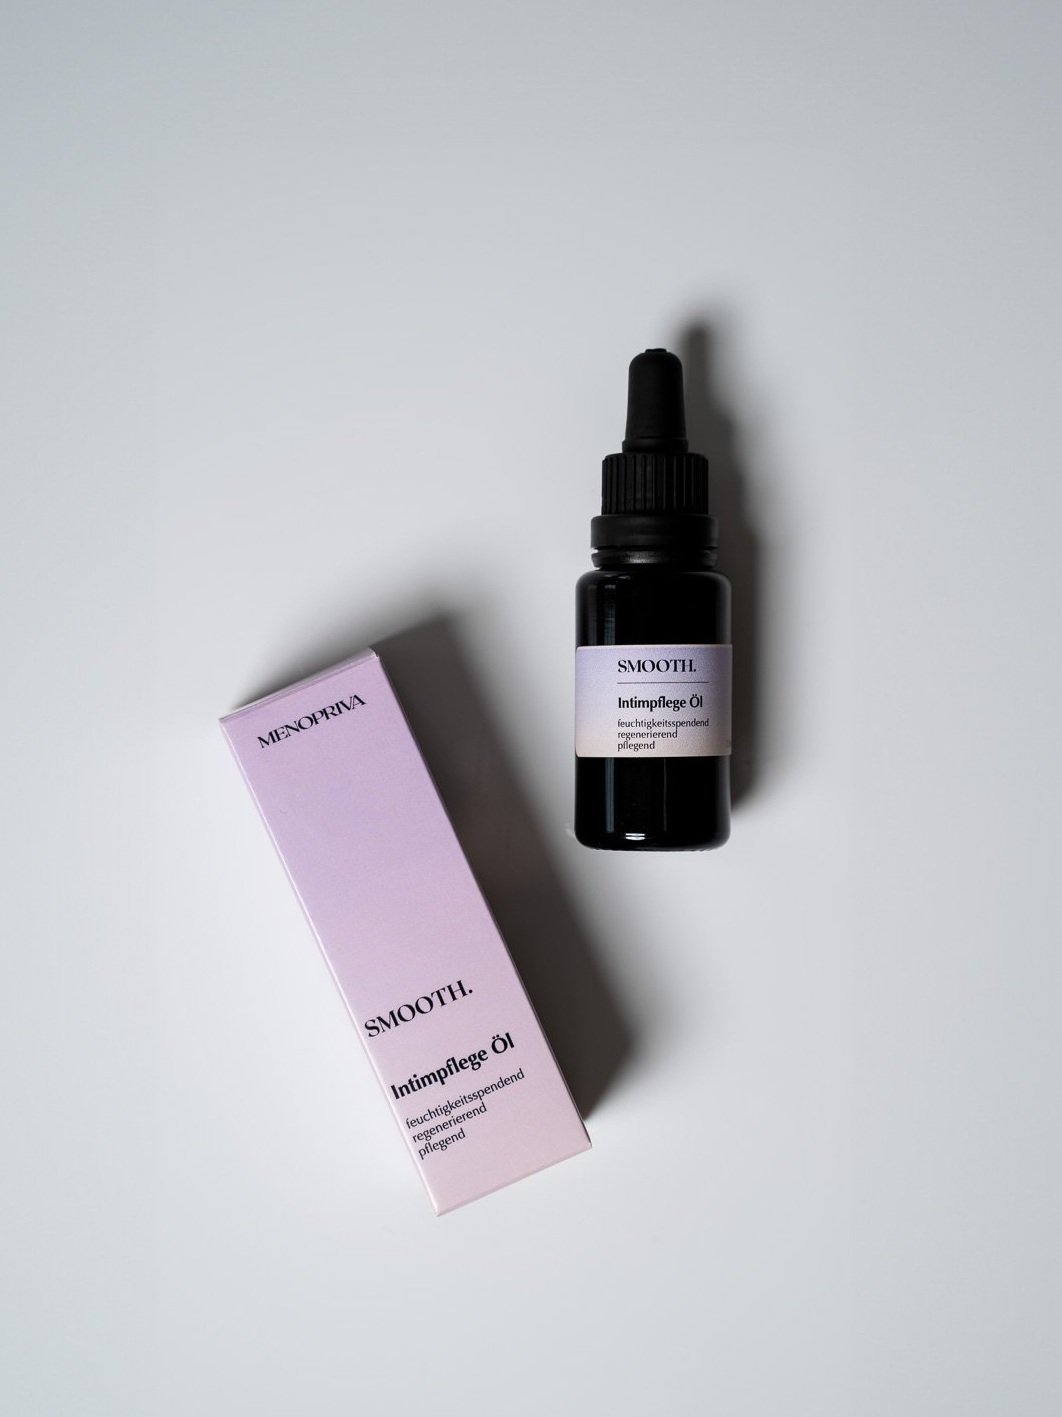 SMOOTH. intimate hygiene oil from Menopriva